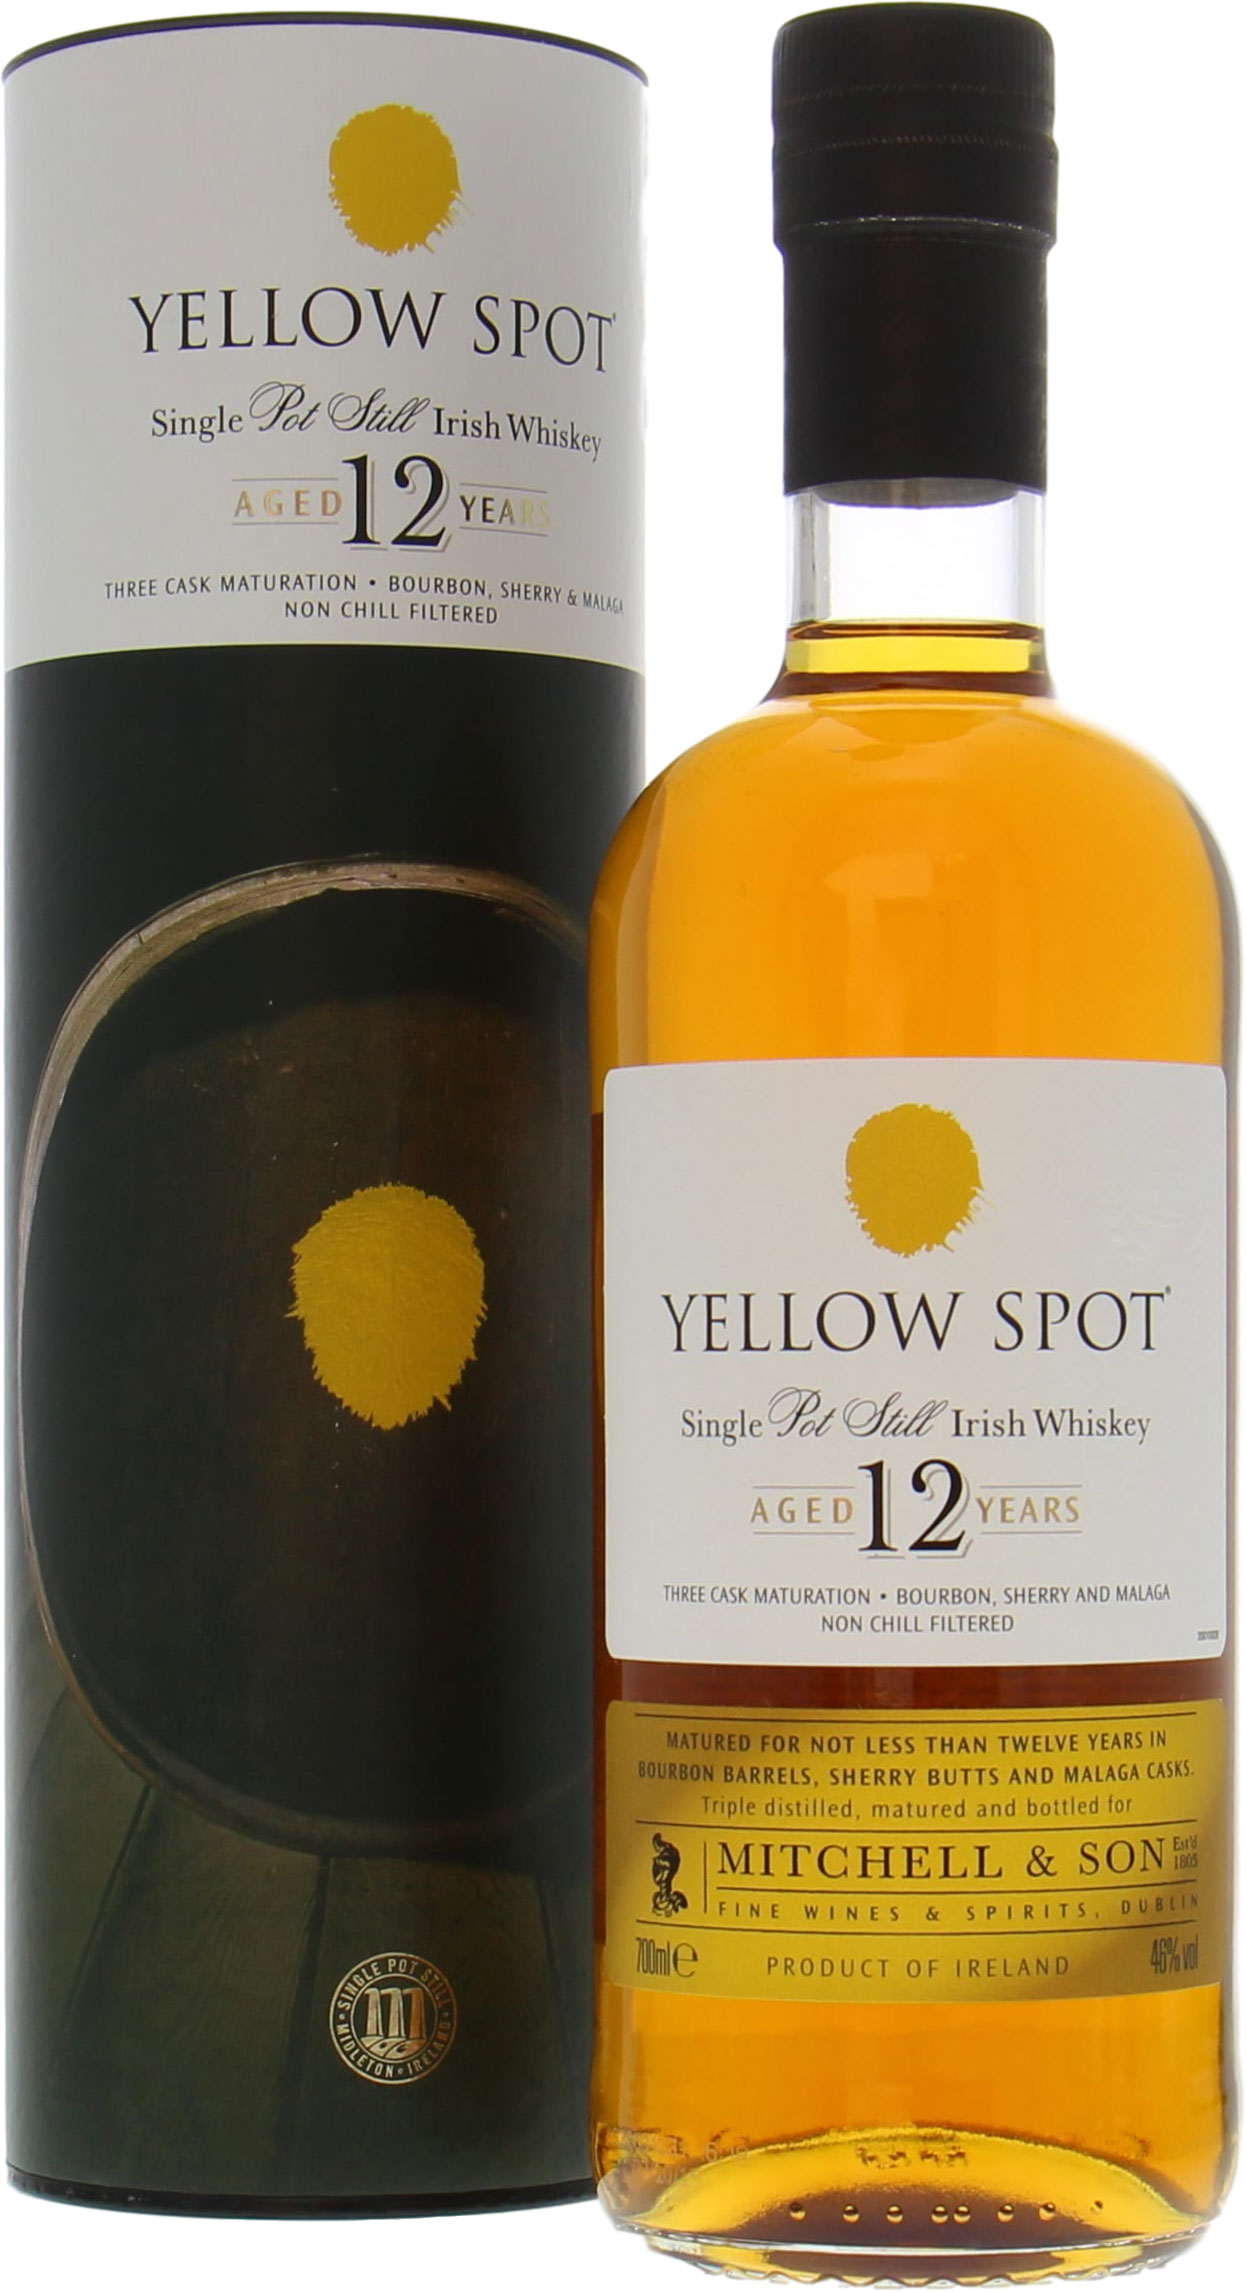 Midleton - Yellow Spot 12 Years Old 46% NV In Original Container